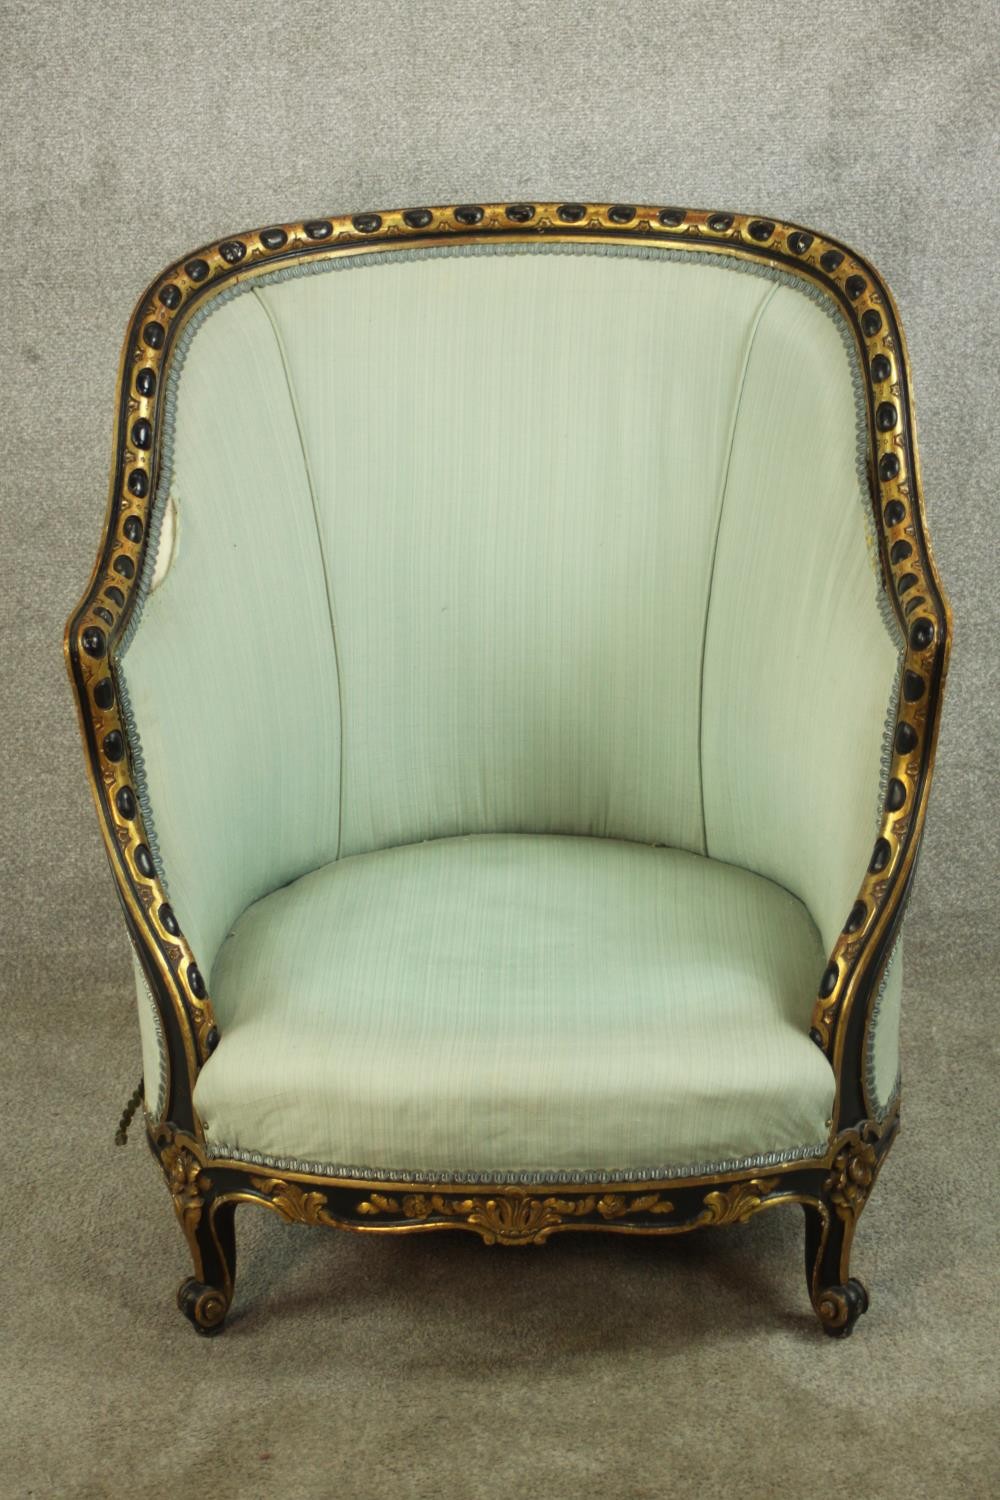 A French Louis XV style tub chair, with egg and dart frame, upholstered in sky blue fabric, raised